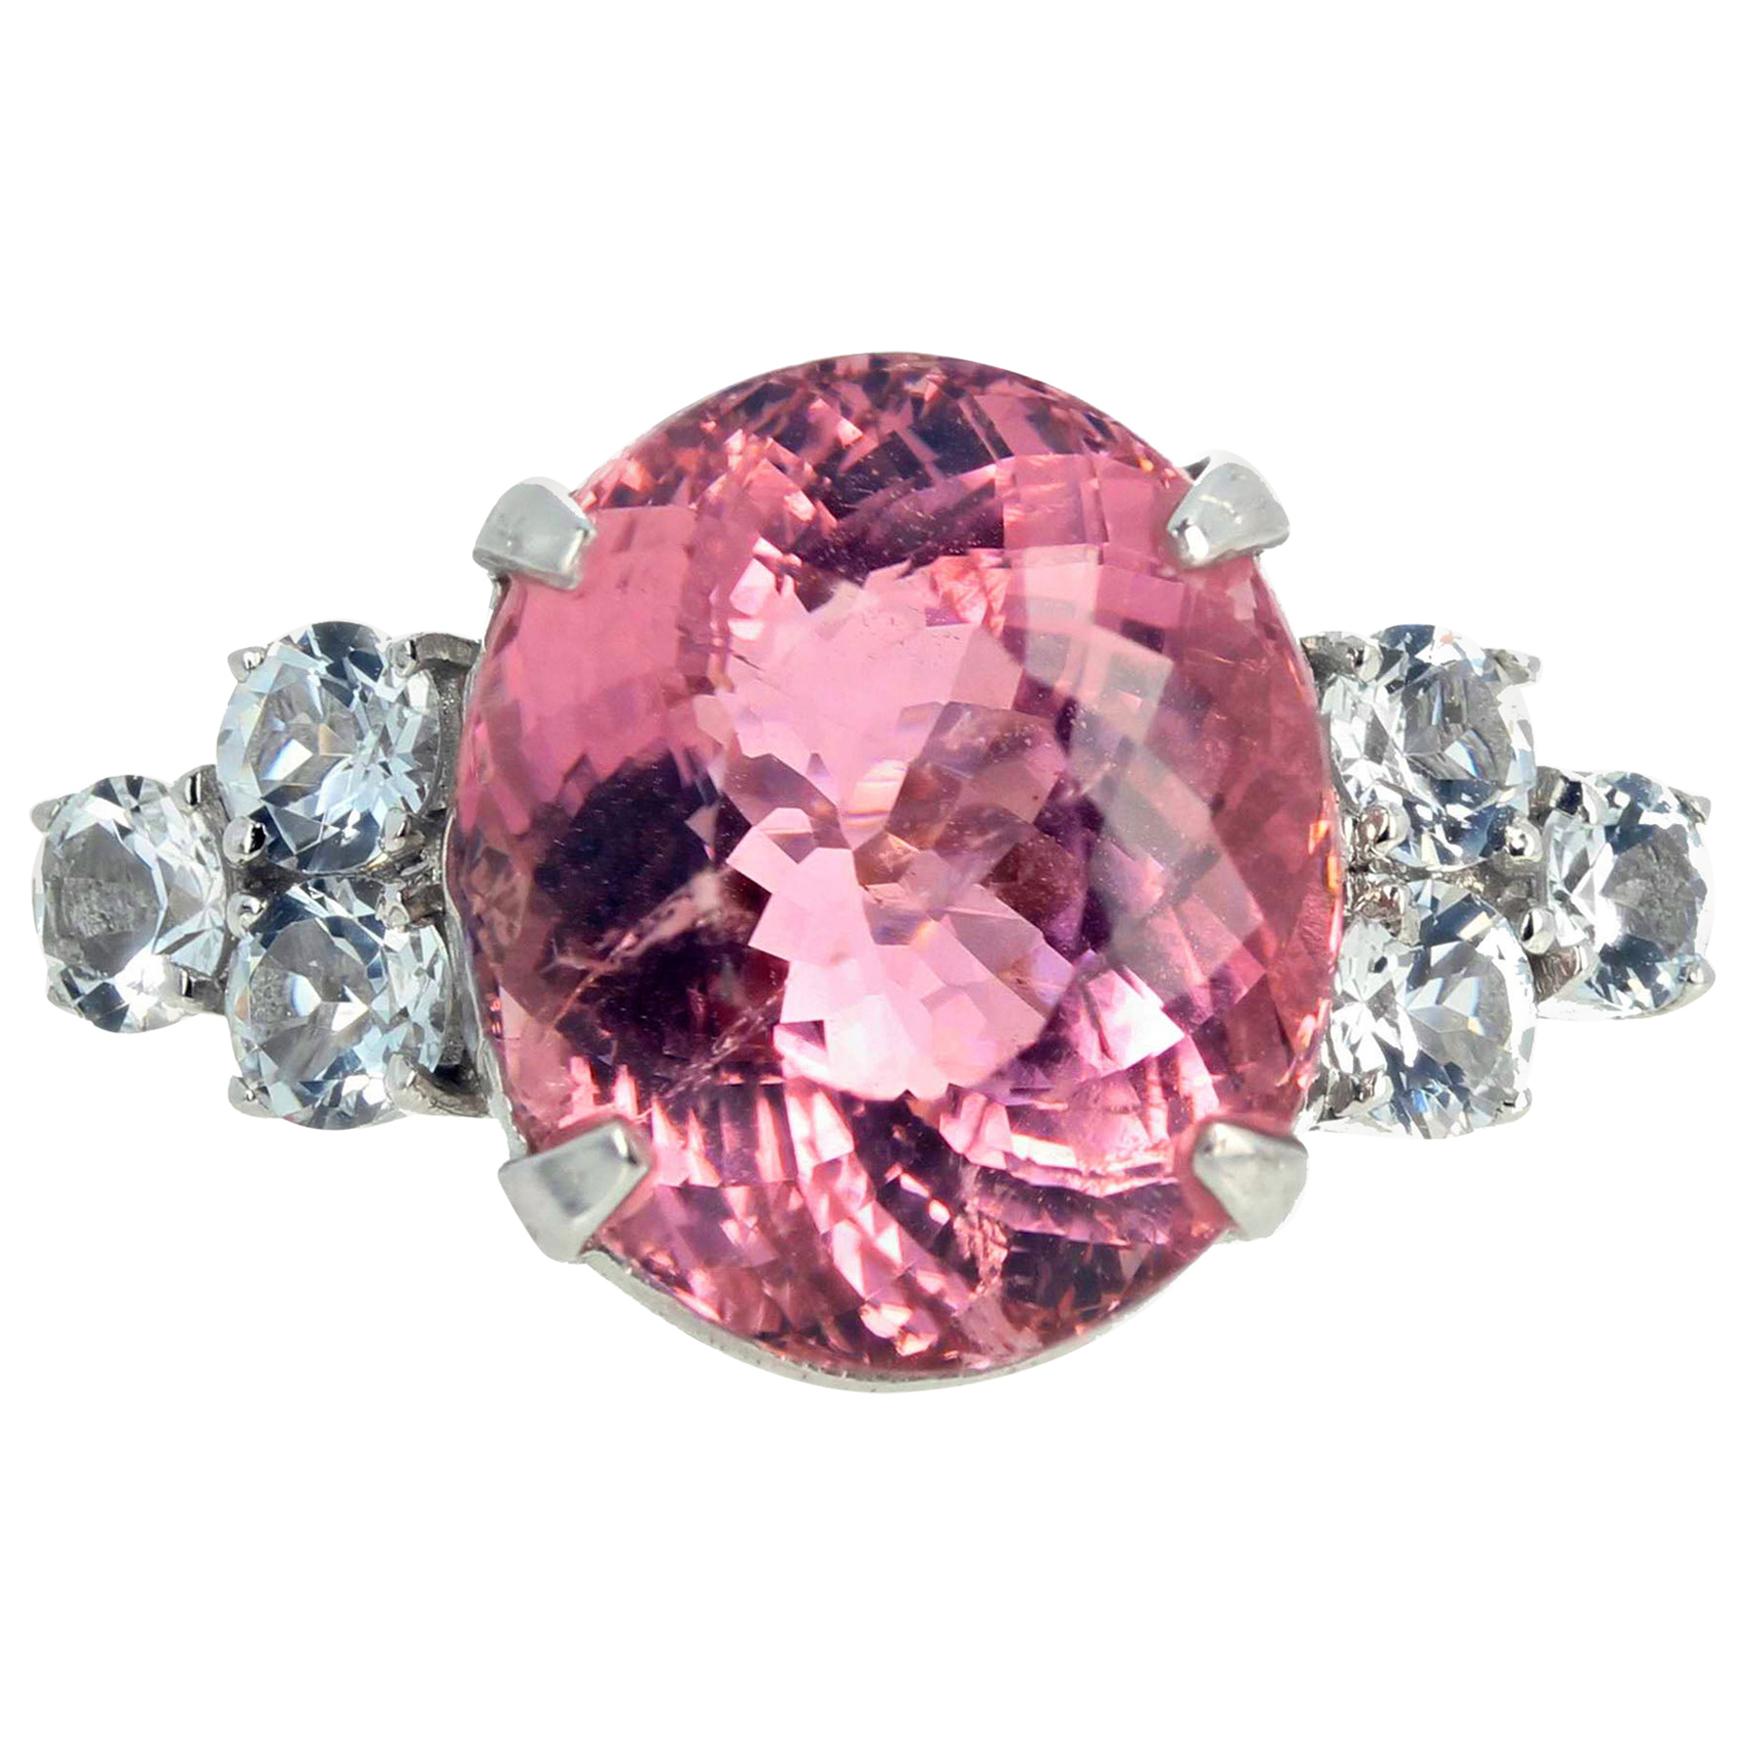 AJD CLEAR GORGEOUS 14.38 Ct Sparkling Pink Tourmaline & Real White Zircons Ring